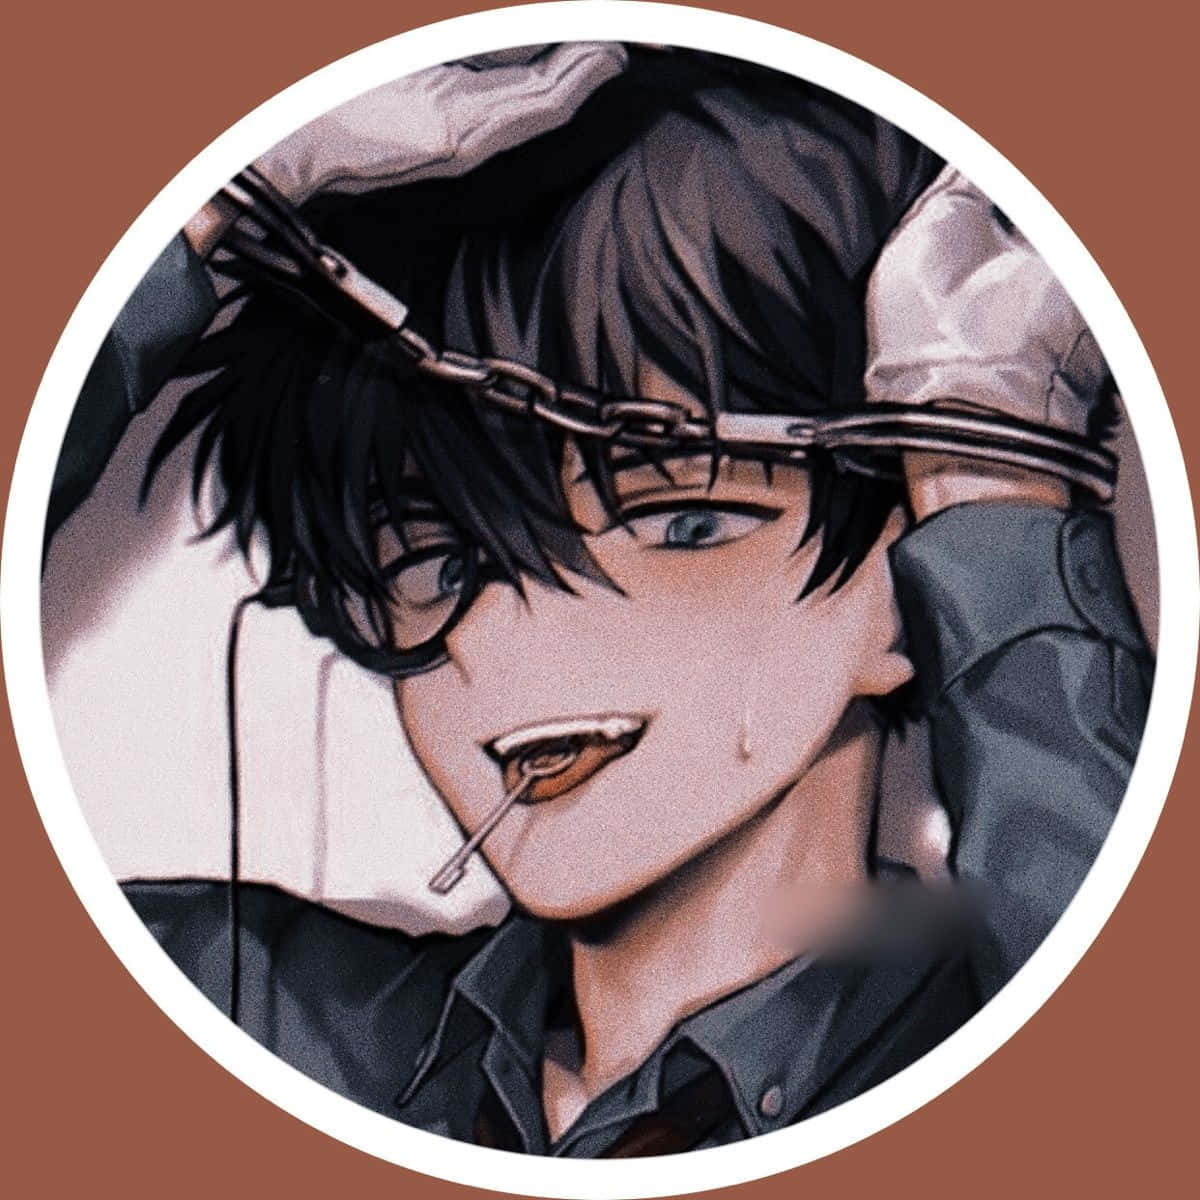 Aesthetic Anime Profile Pictures To Use